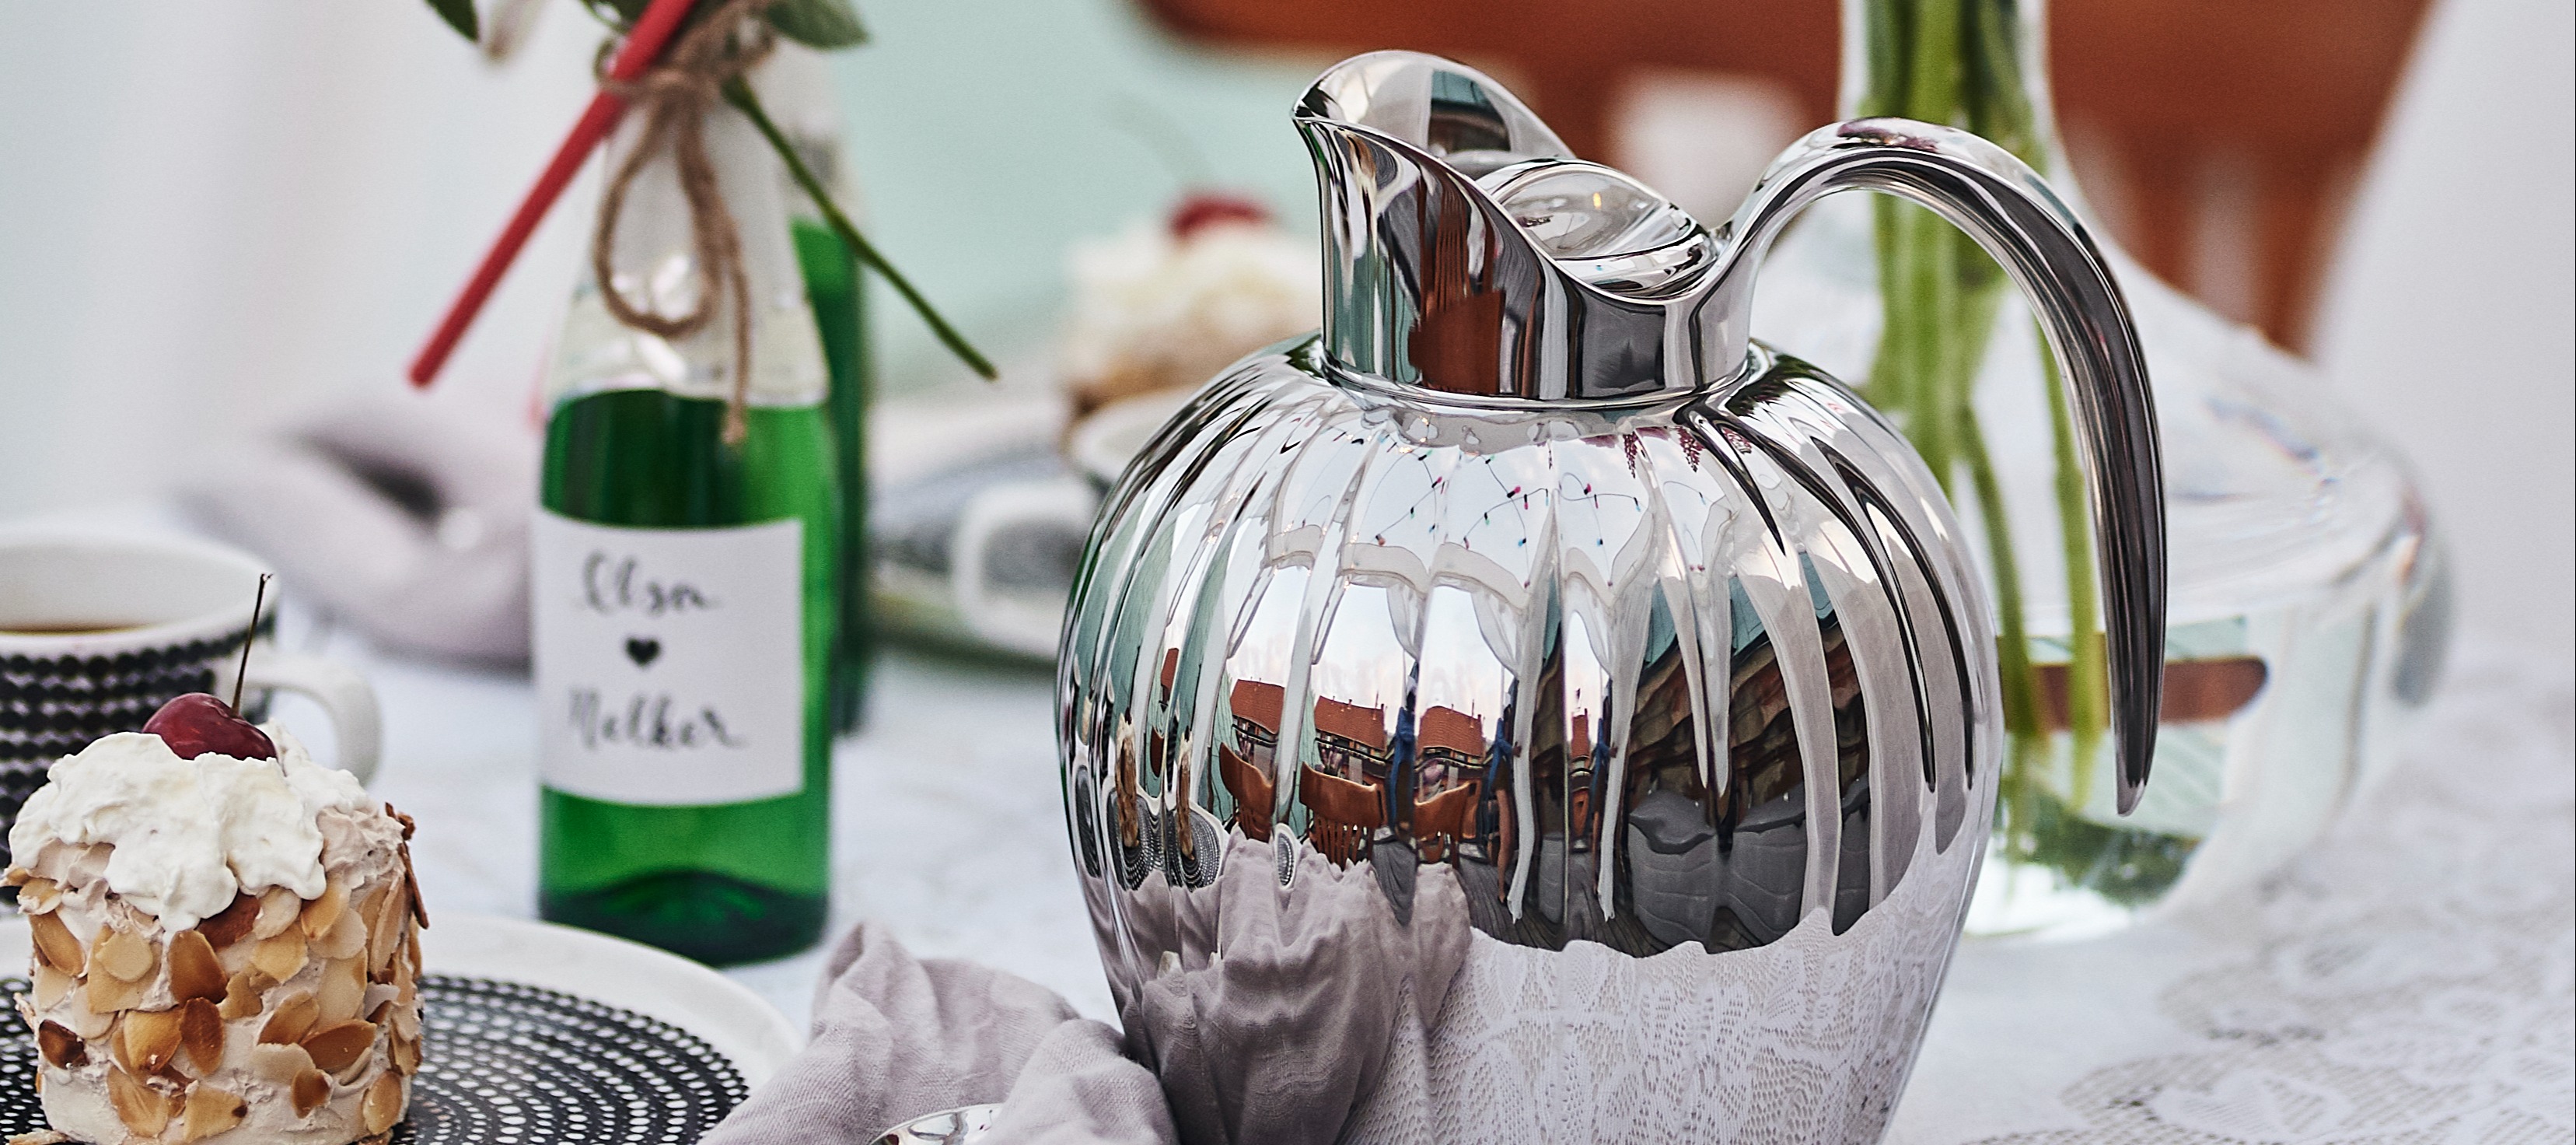 37 Expensive Looking Cheap DIY Wedding Gifts